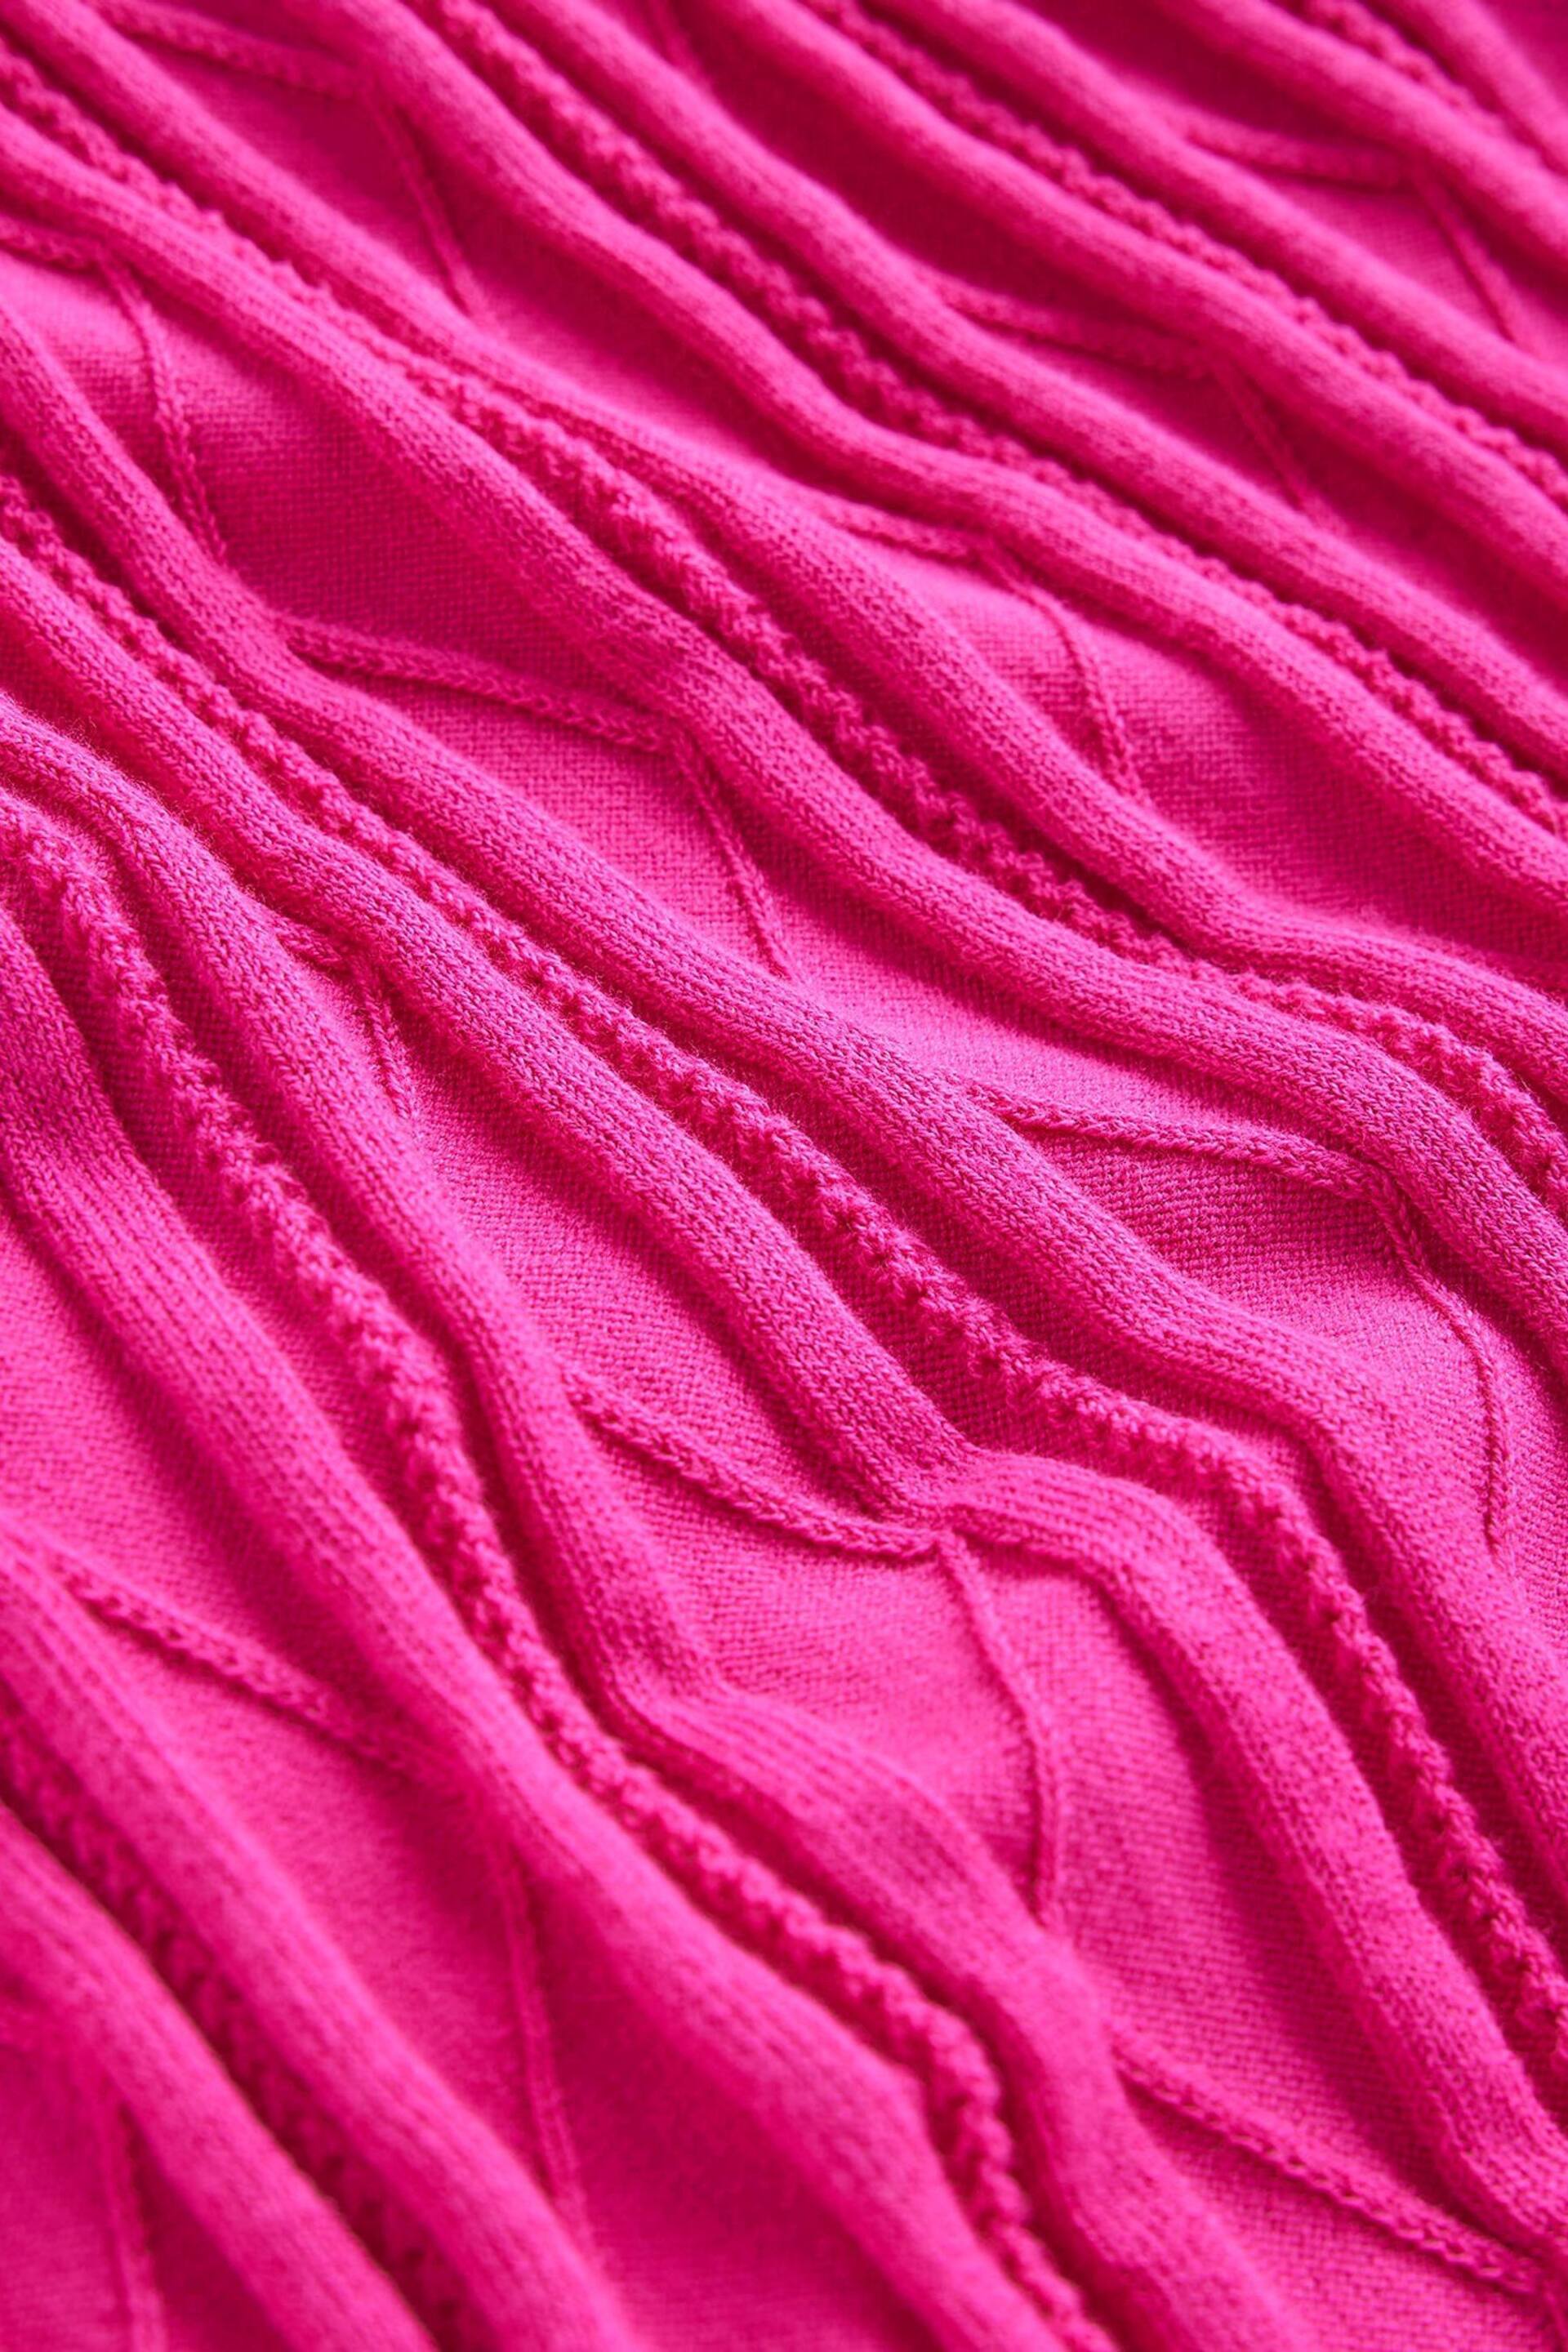 Boden Pink Imogen Empire Knitted Dress - Image 6 of 6